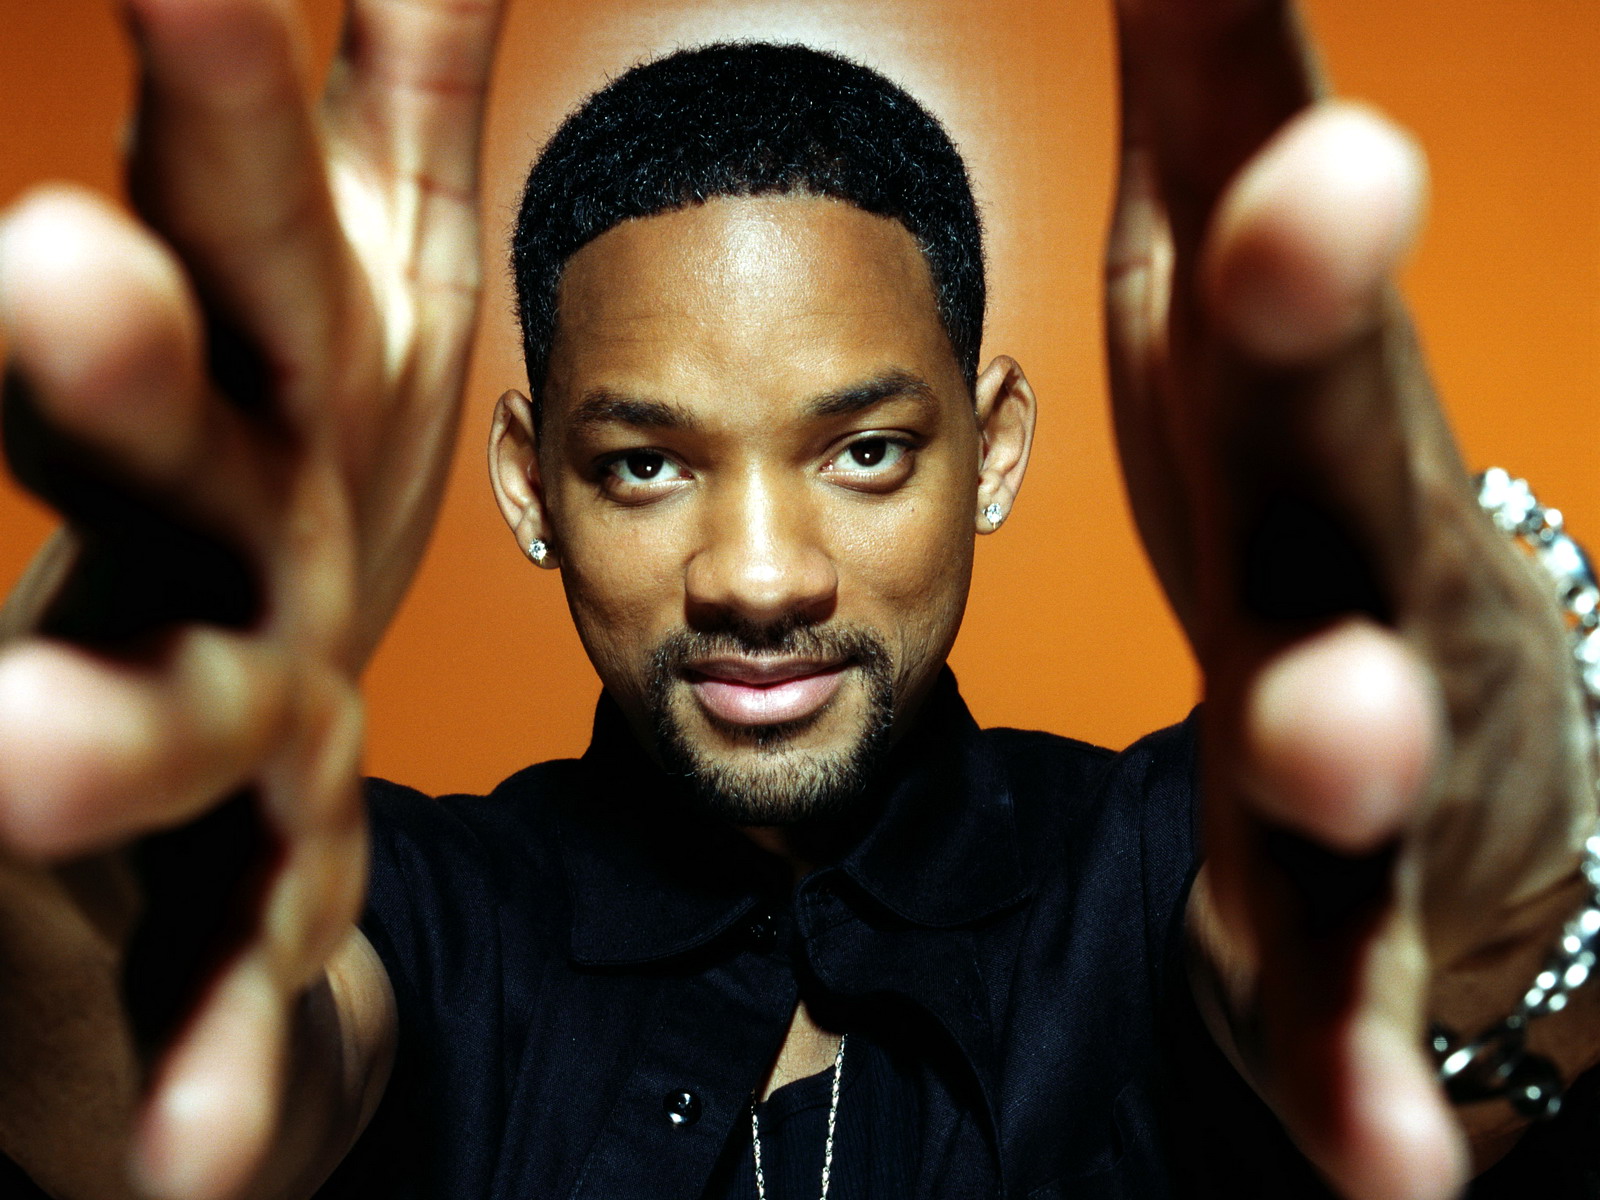 will smith fonds d'écran hd,cheveux,coiffure,front,geste,barbe